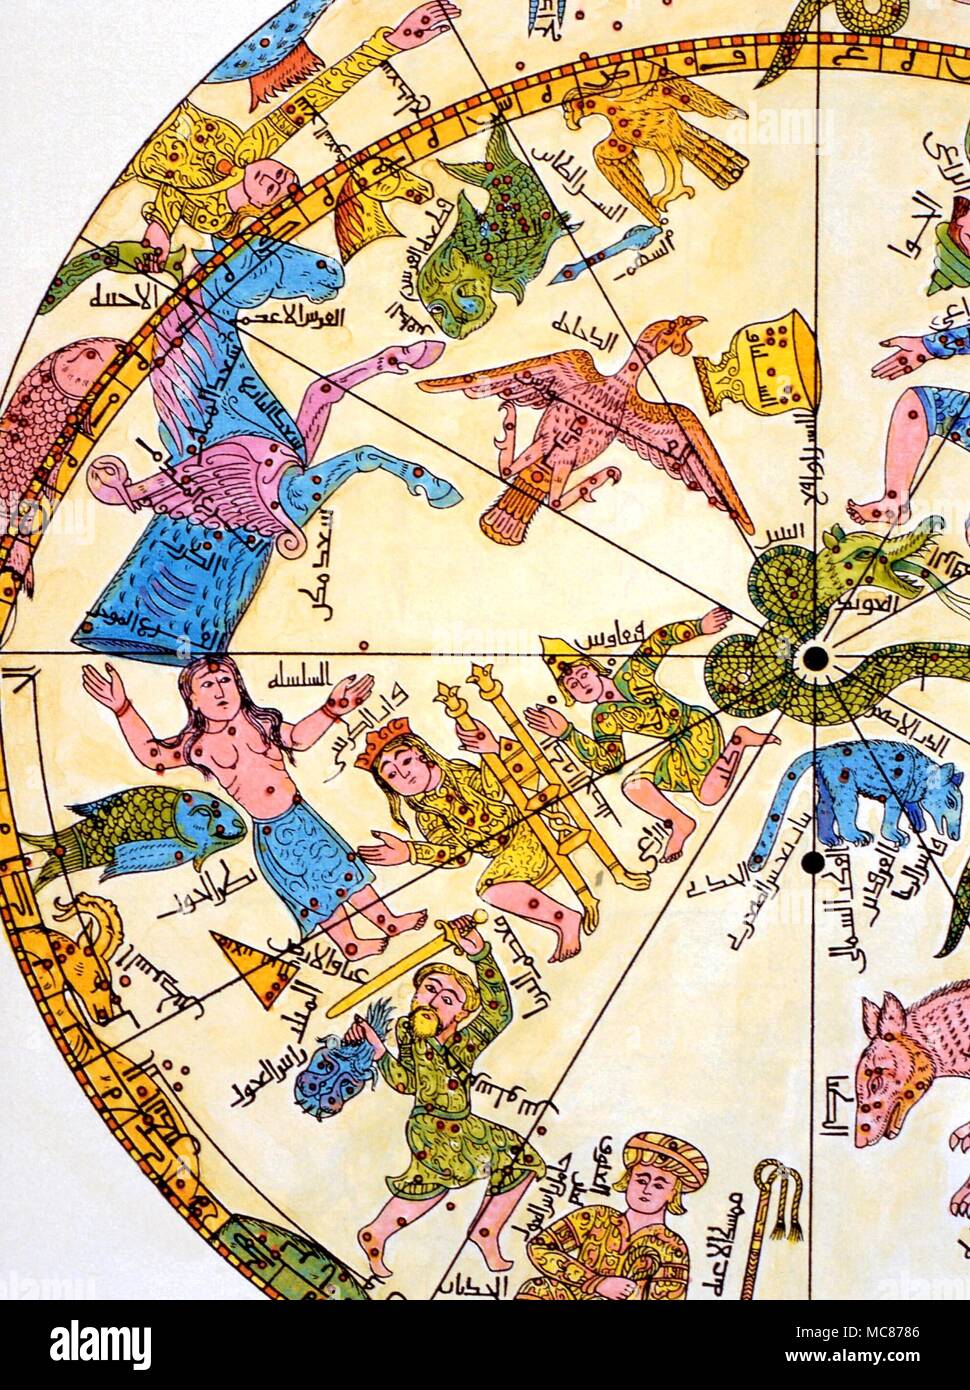 ASTROLOGY - Pegasus Images of various northern constellations, with the flying horse, Pegasus, predominant. Arabic map lithographed circa 1860 Stock Photo